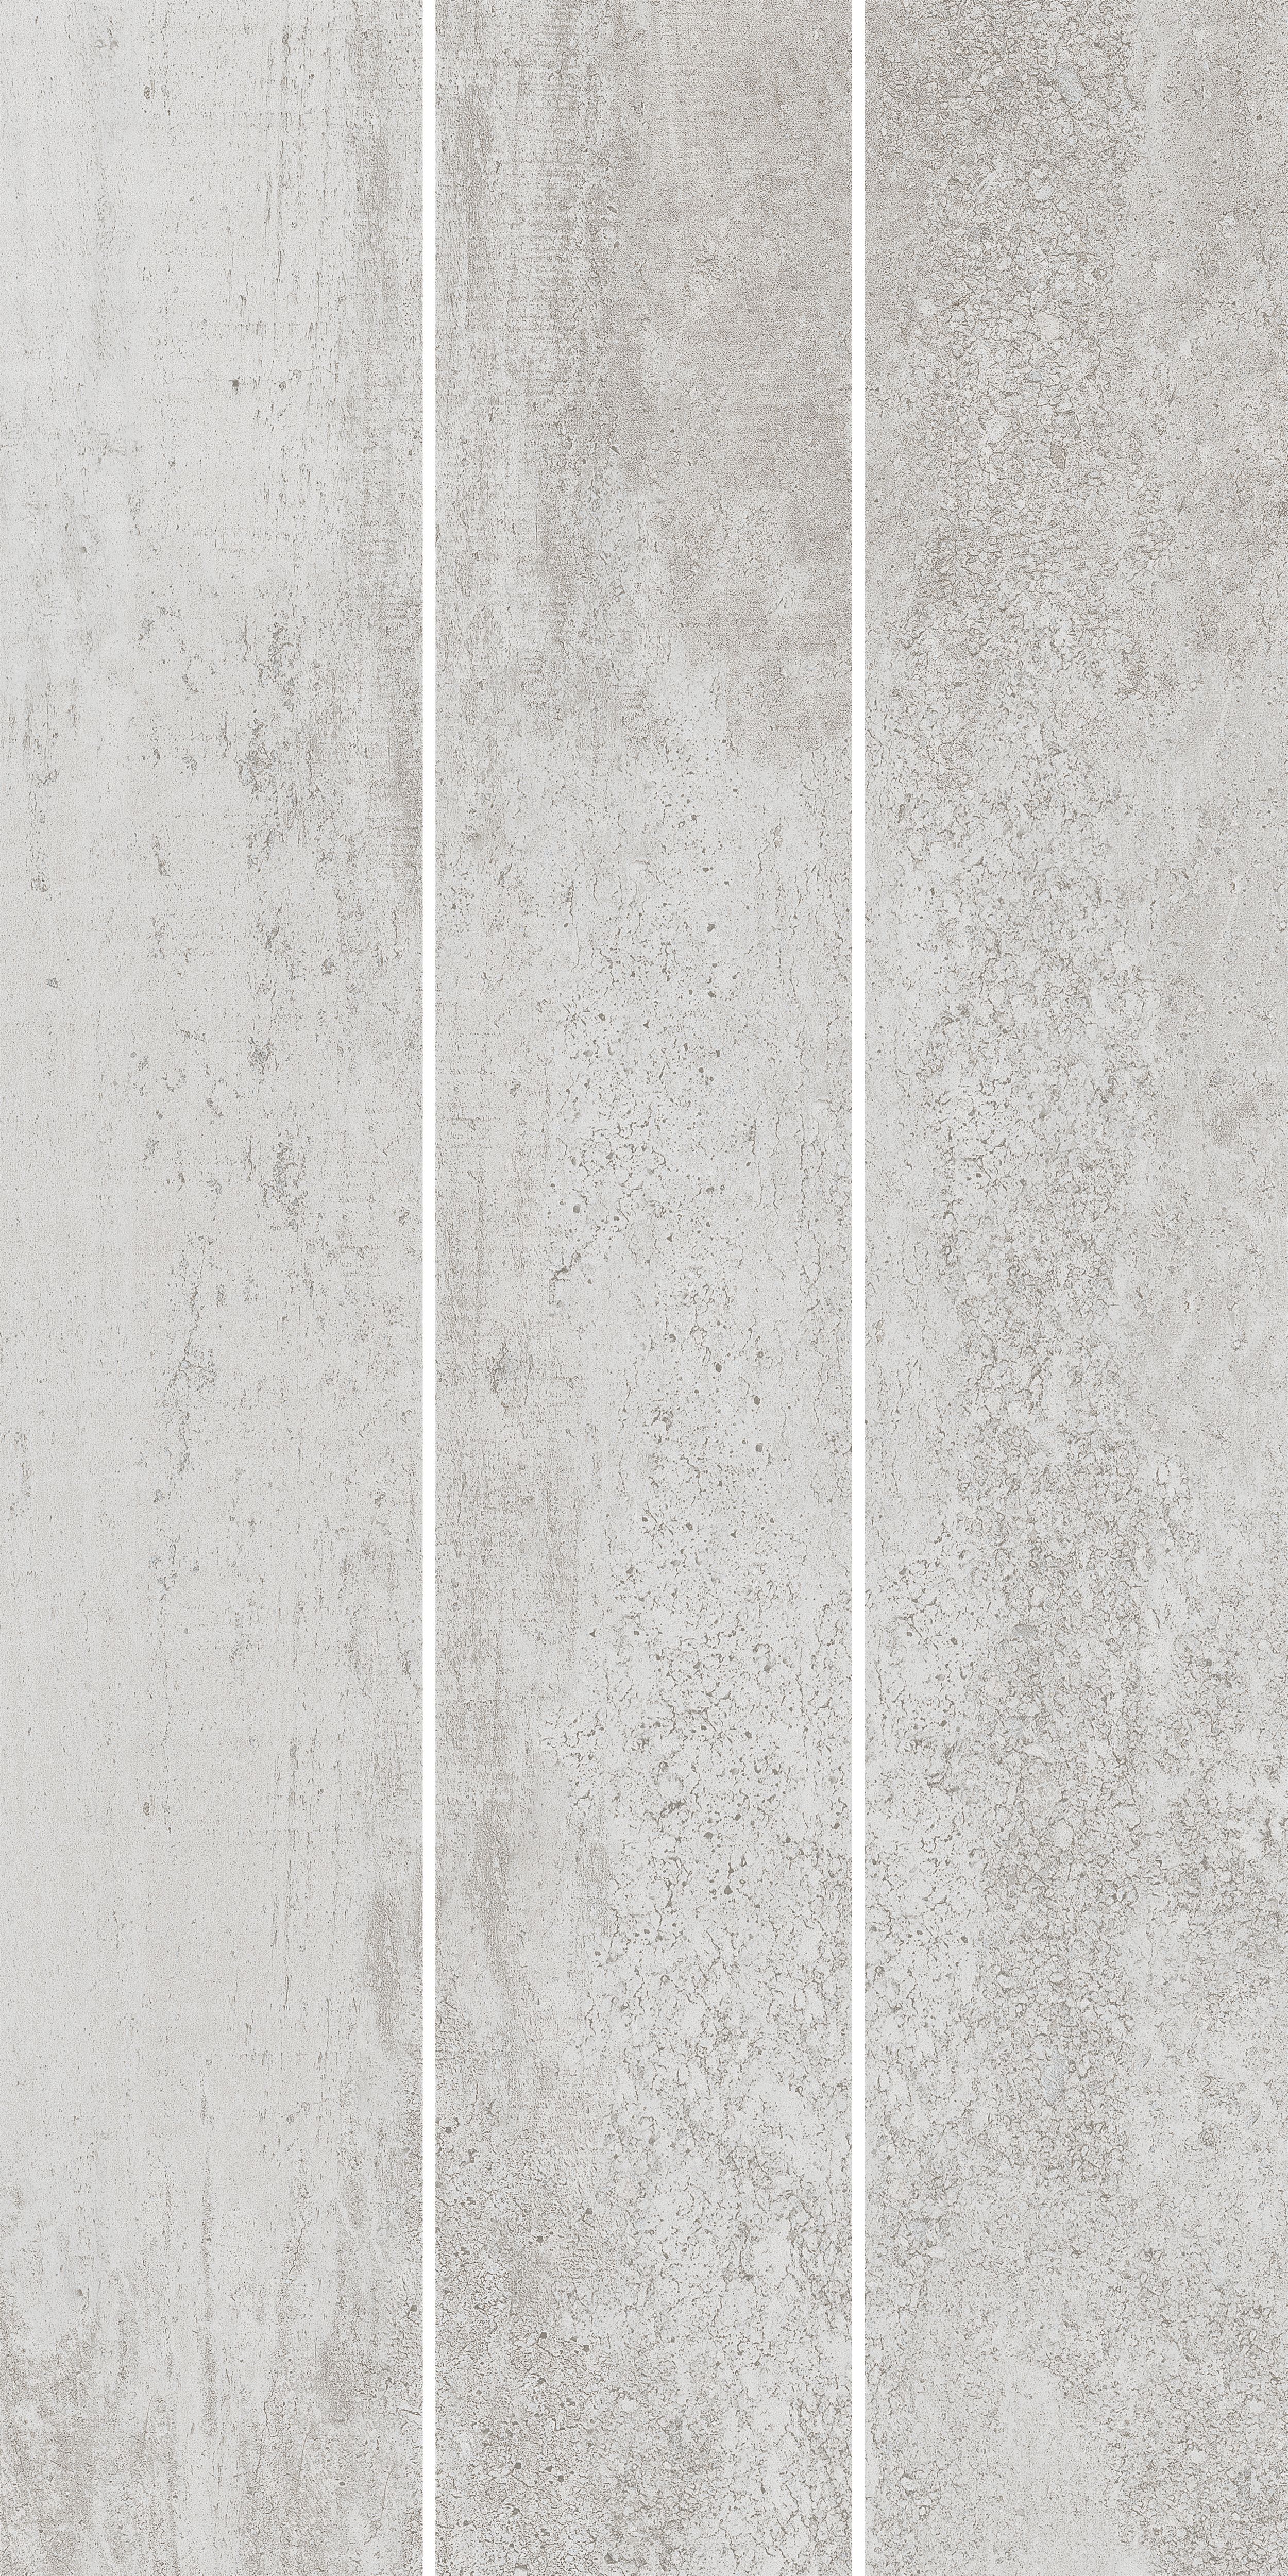 Ashlar Crafted Grey Matt Textured Stone effect Ceramic Wall Tile, Pack of 5, (L)600mm (W)300mm